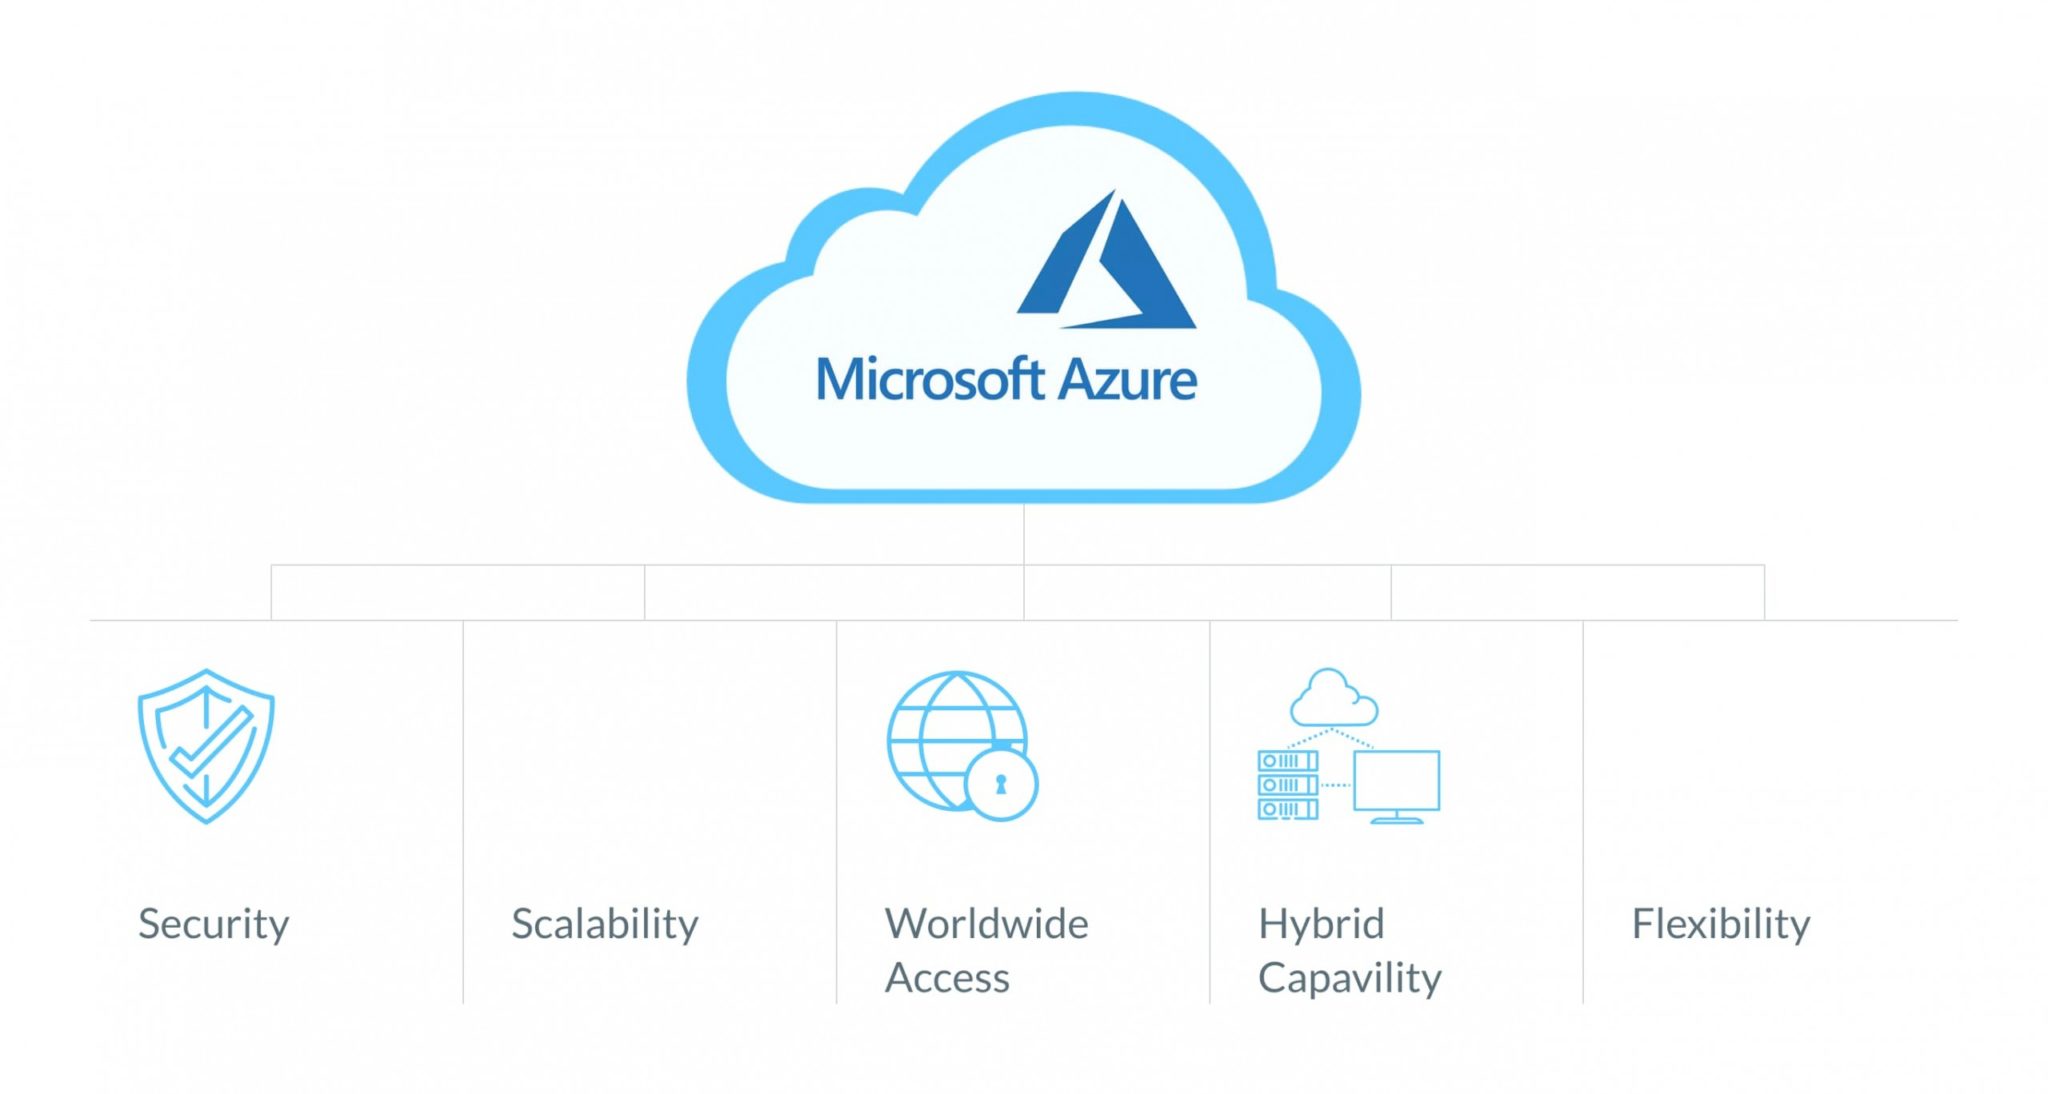 What is microsoft azure used for?